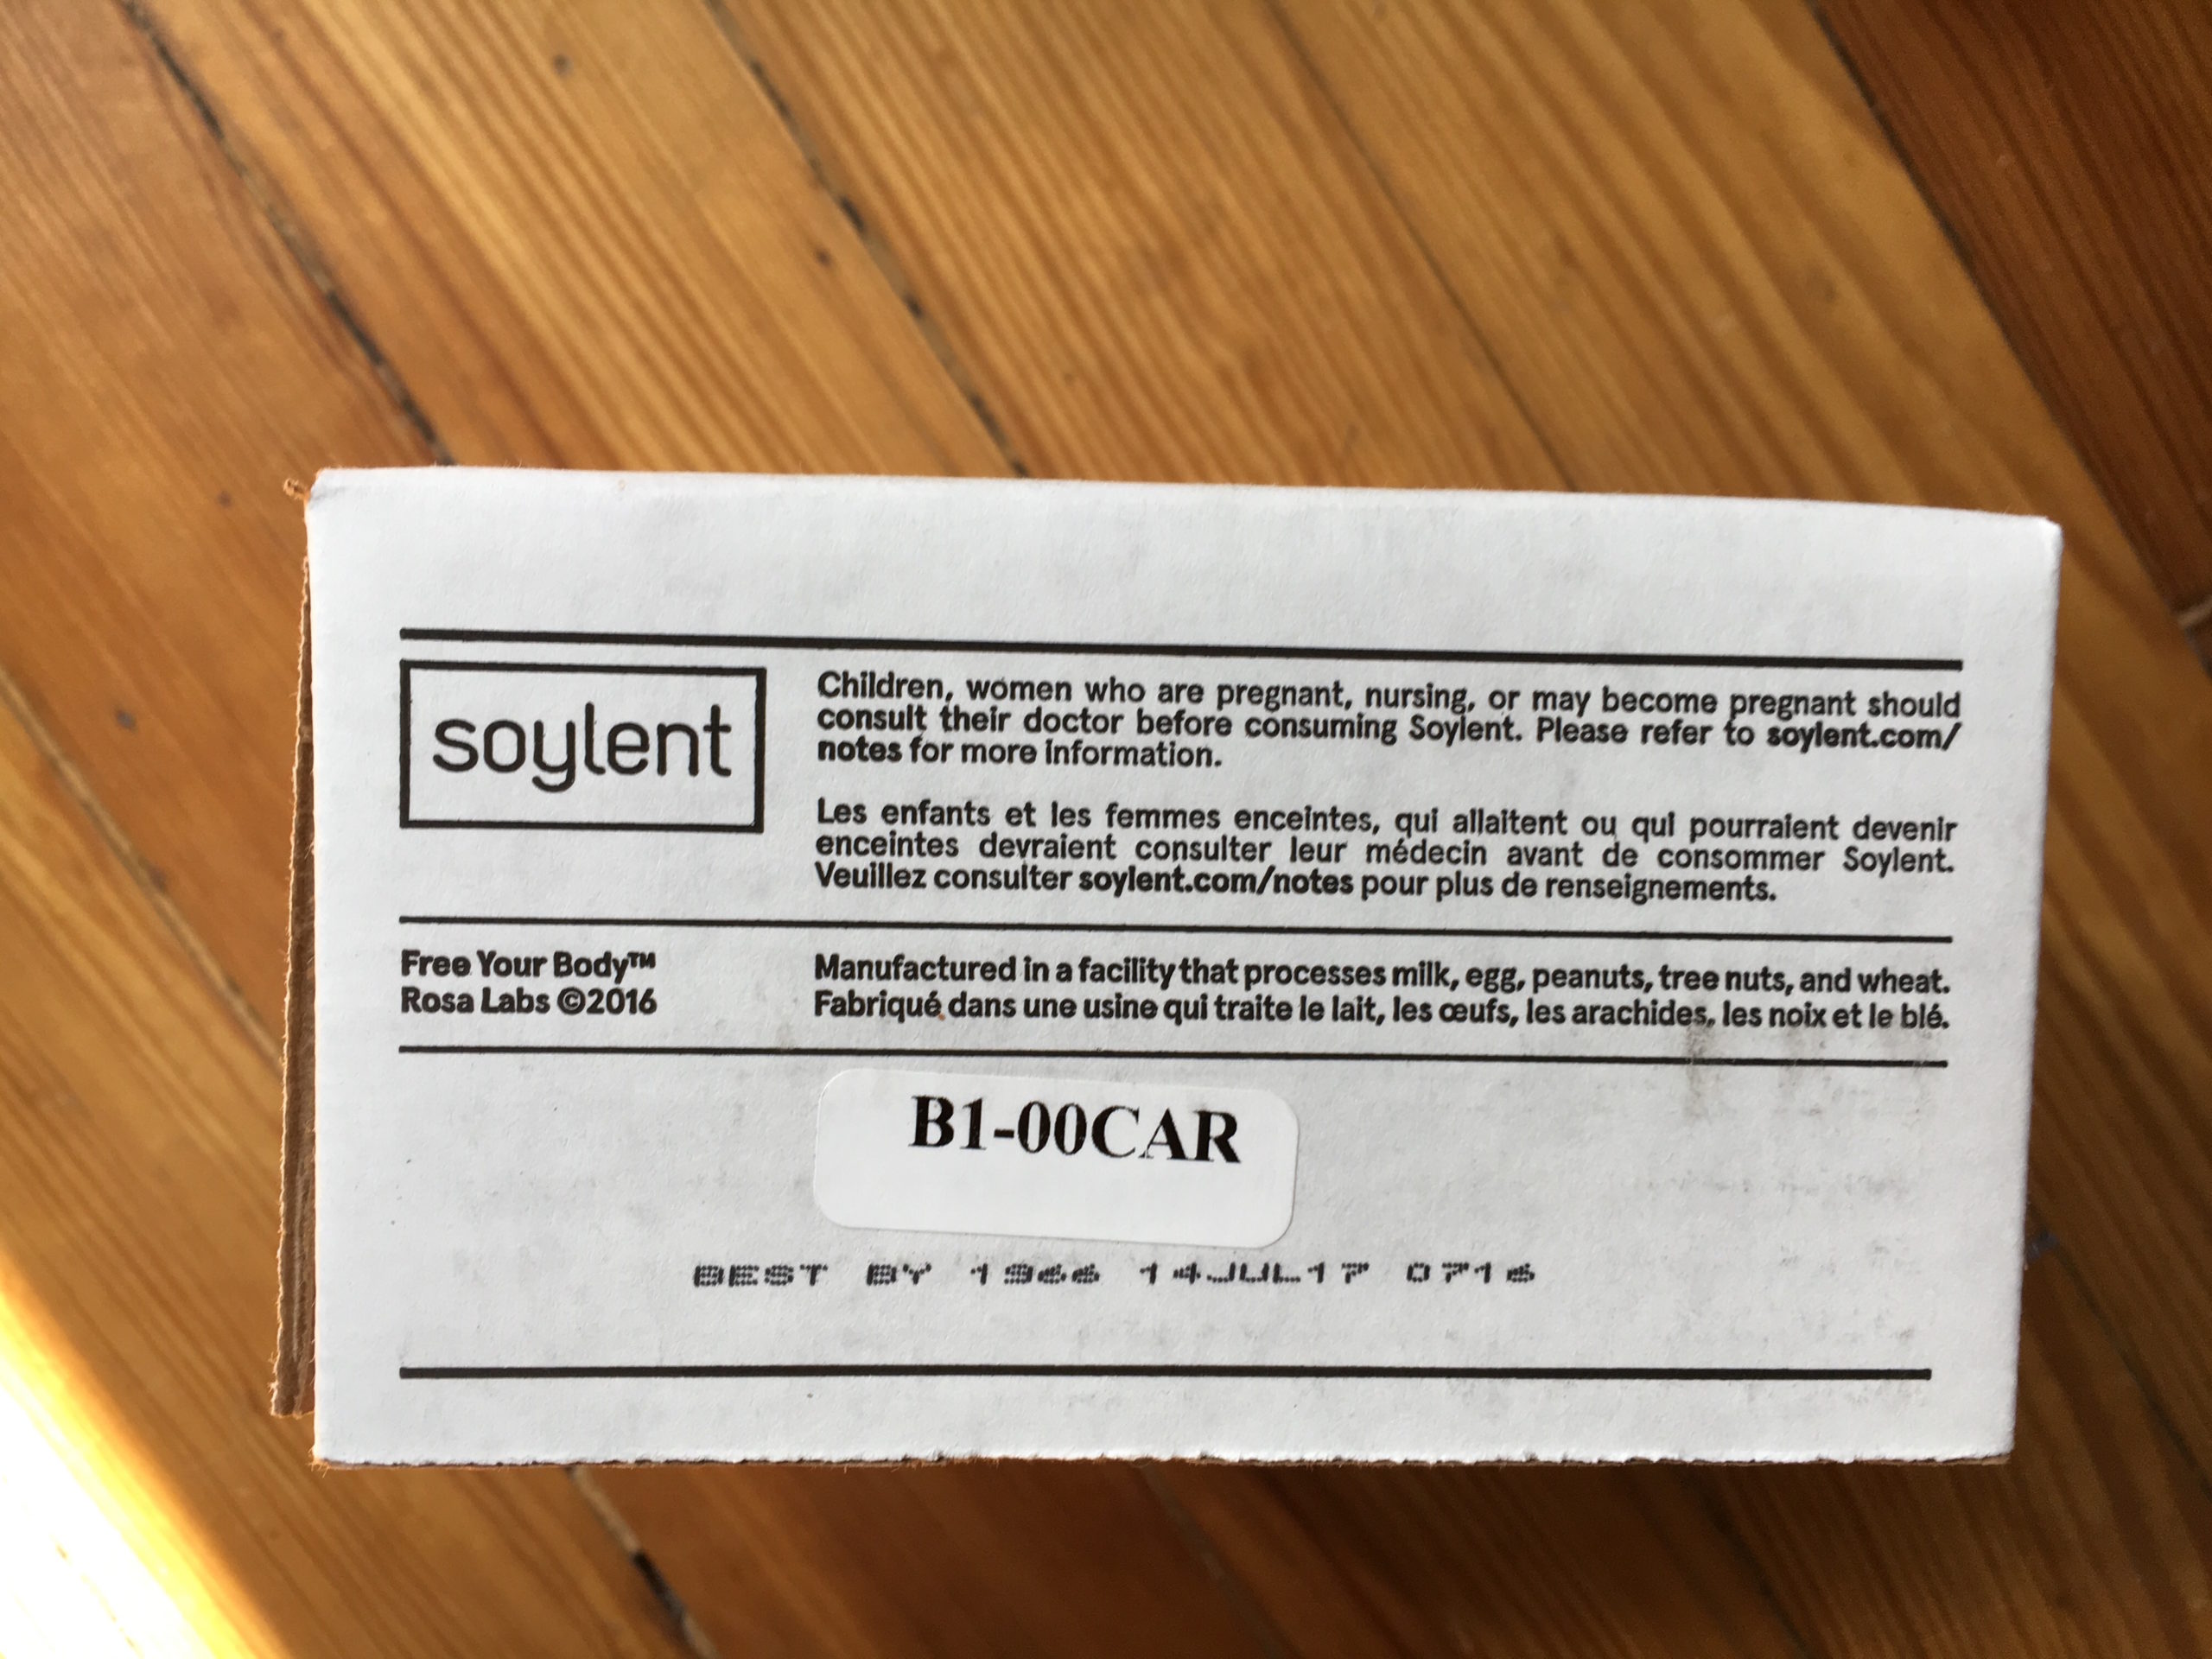 More Details Emerge About The Soylent Food Bars Making People Sick